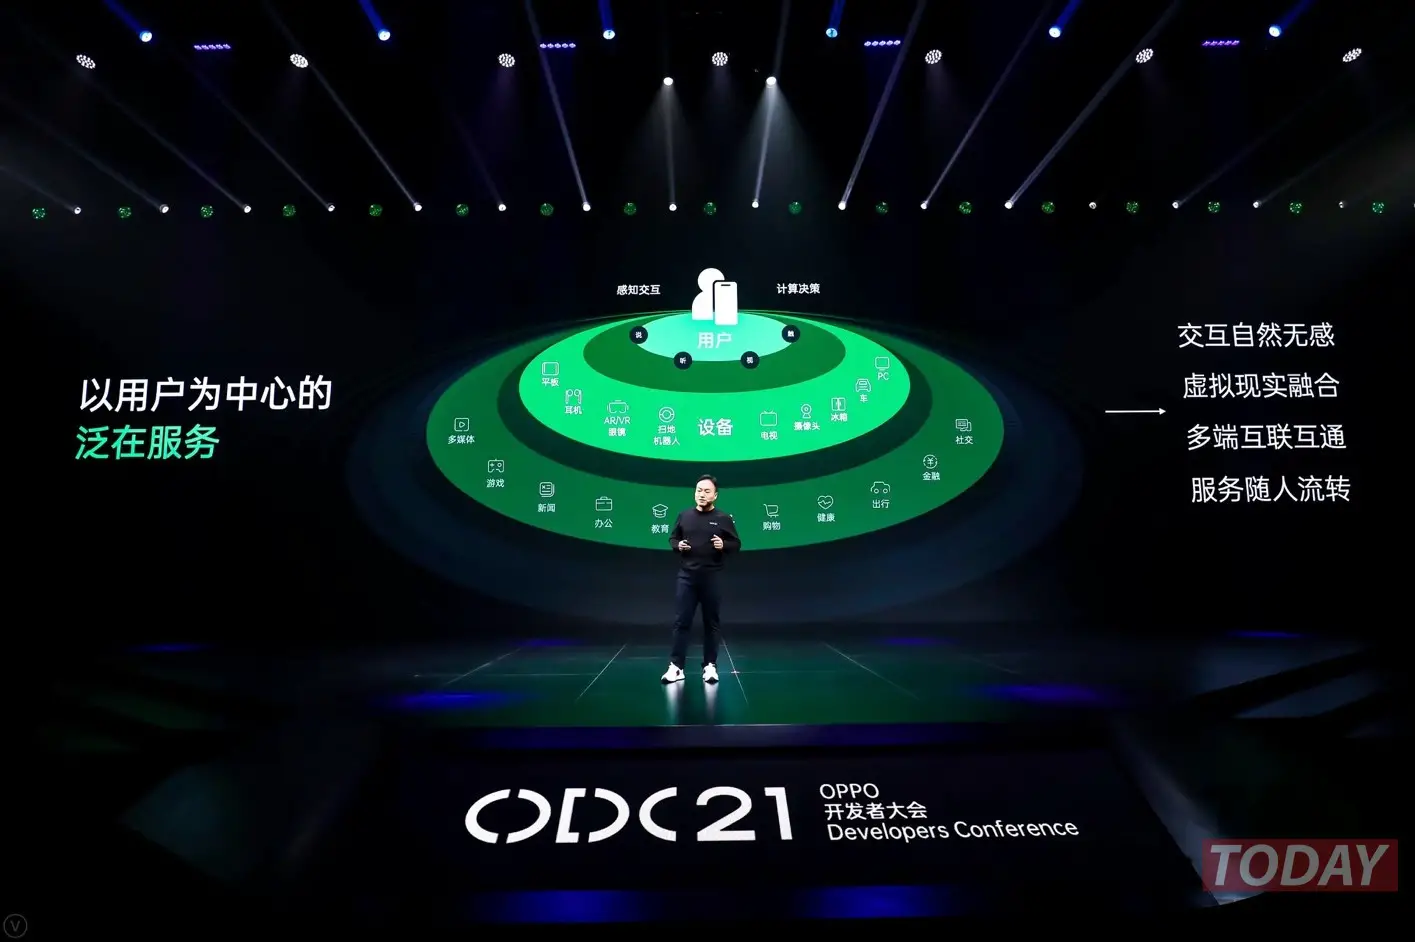 OPPO ray tracing smartphone